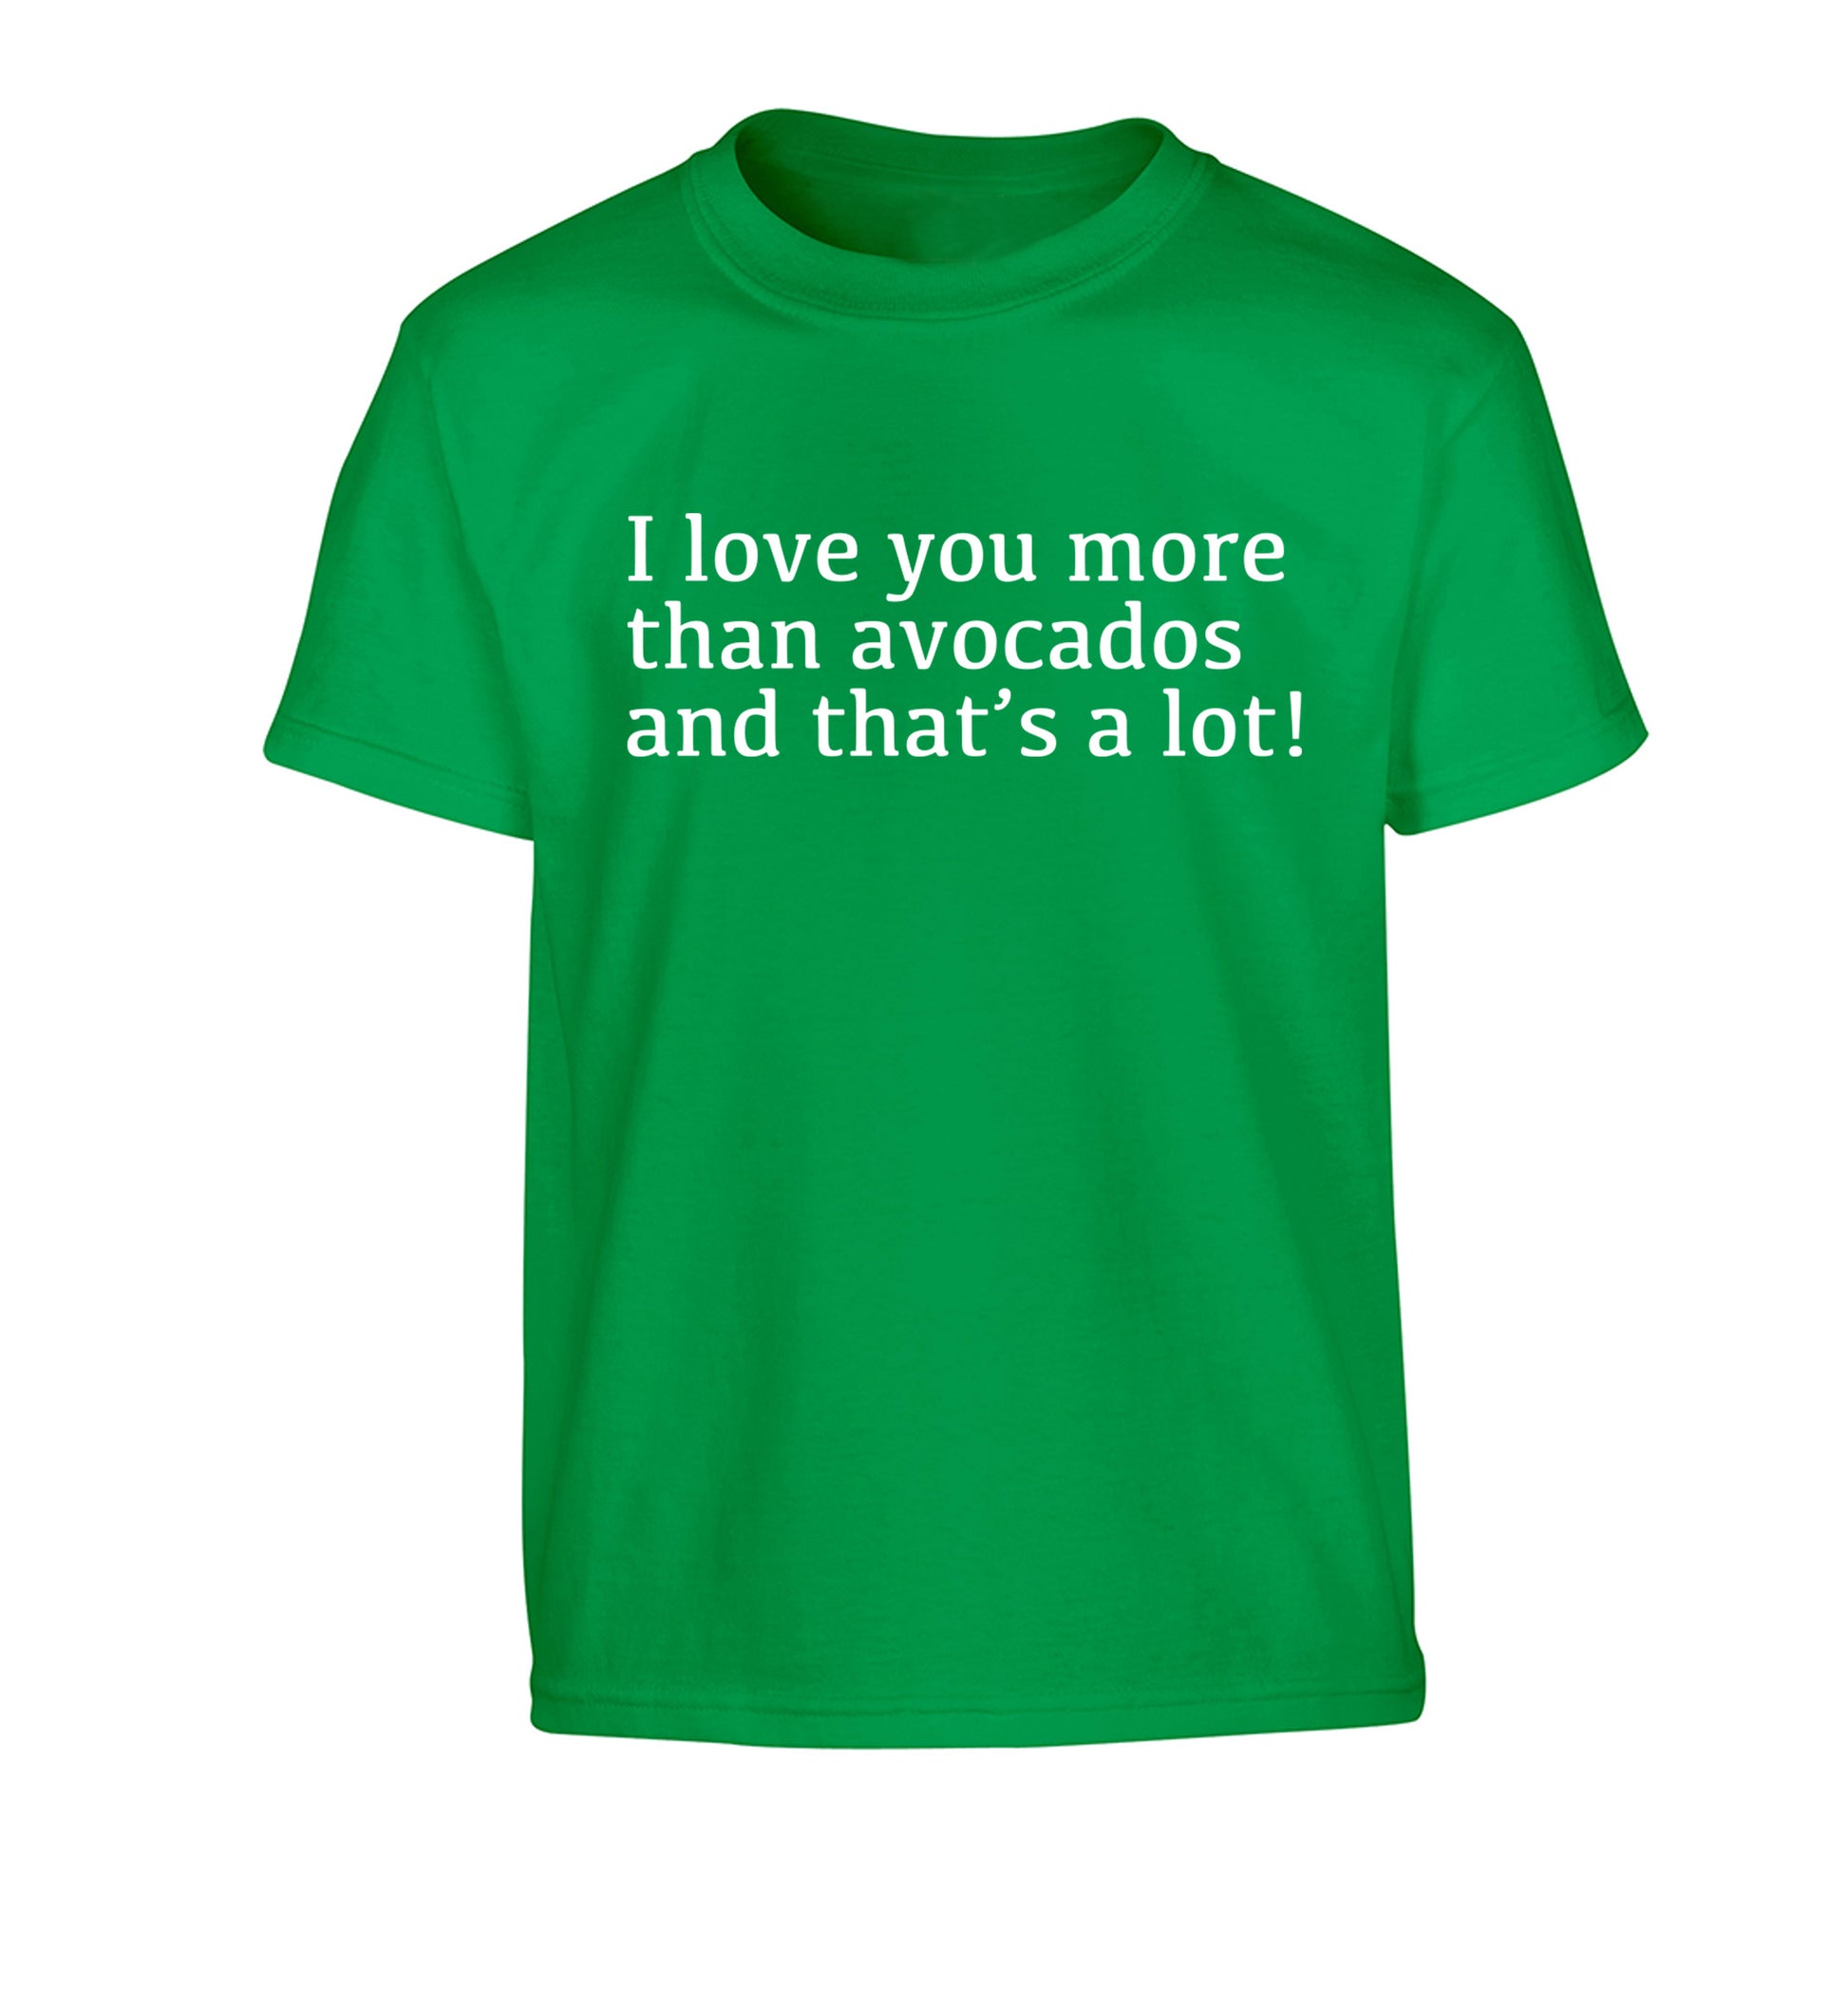 I love you more than avocados and that's a lot Children's green Tshirt 12-14 Years